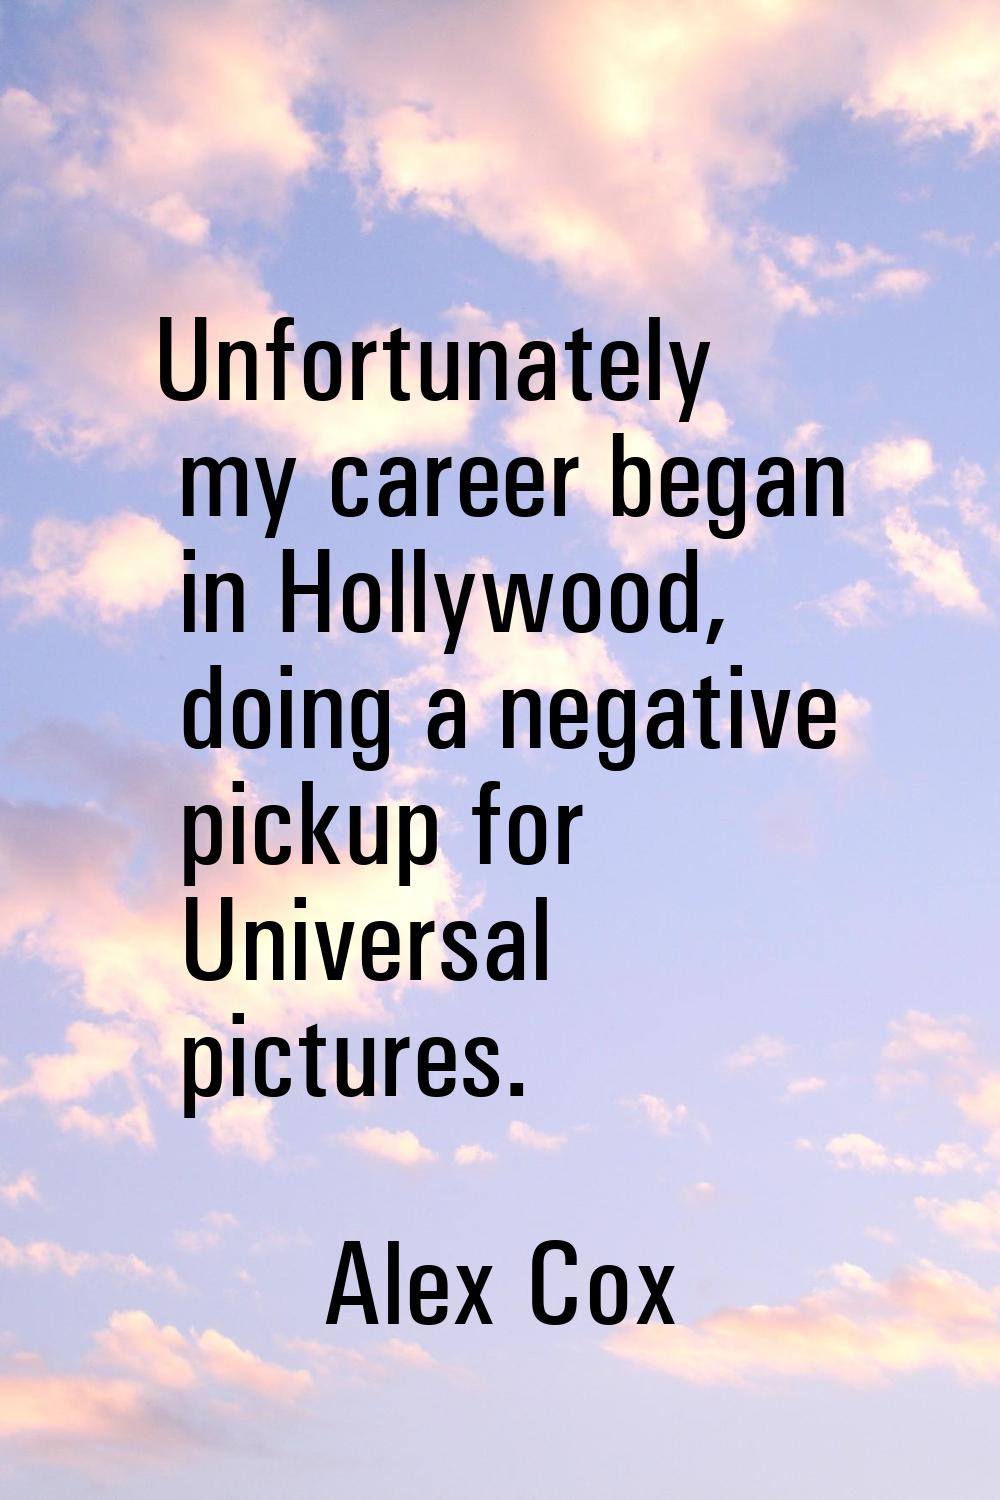 Unfortunately my career began in Hollywood, doing a negative pickup for Universal pictures.